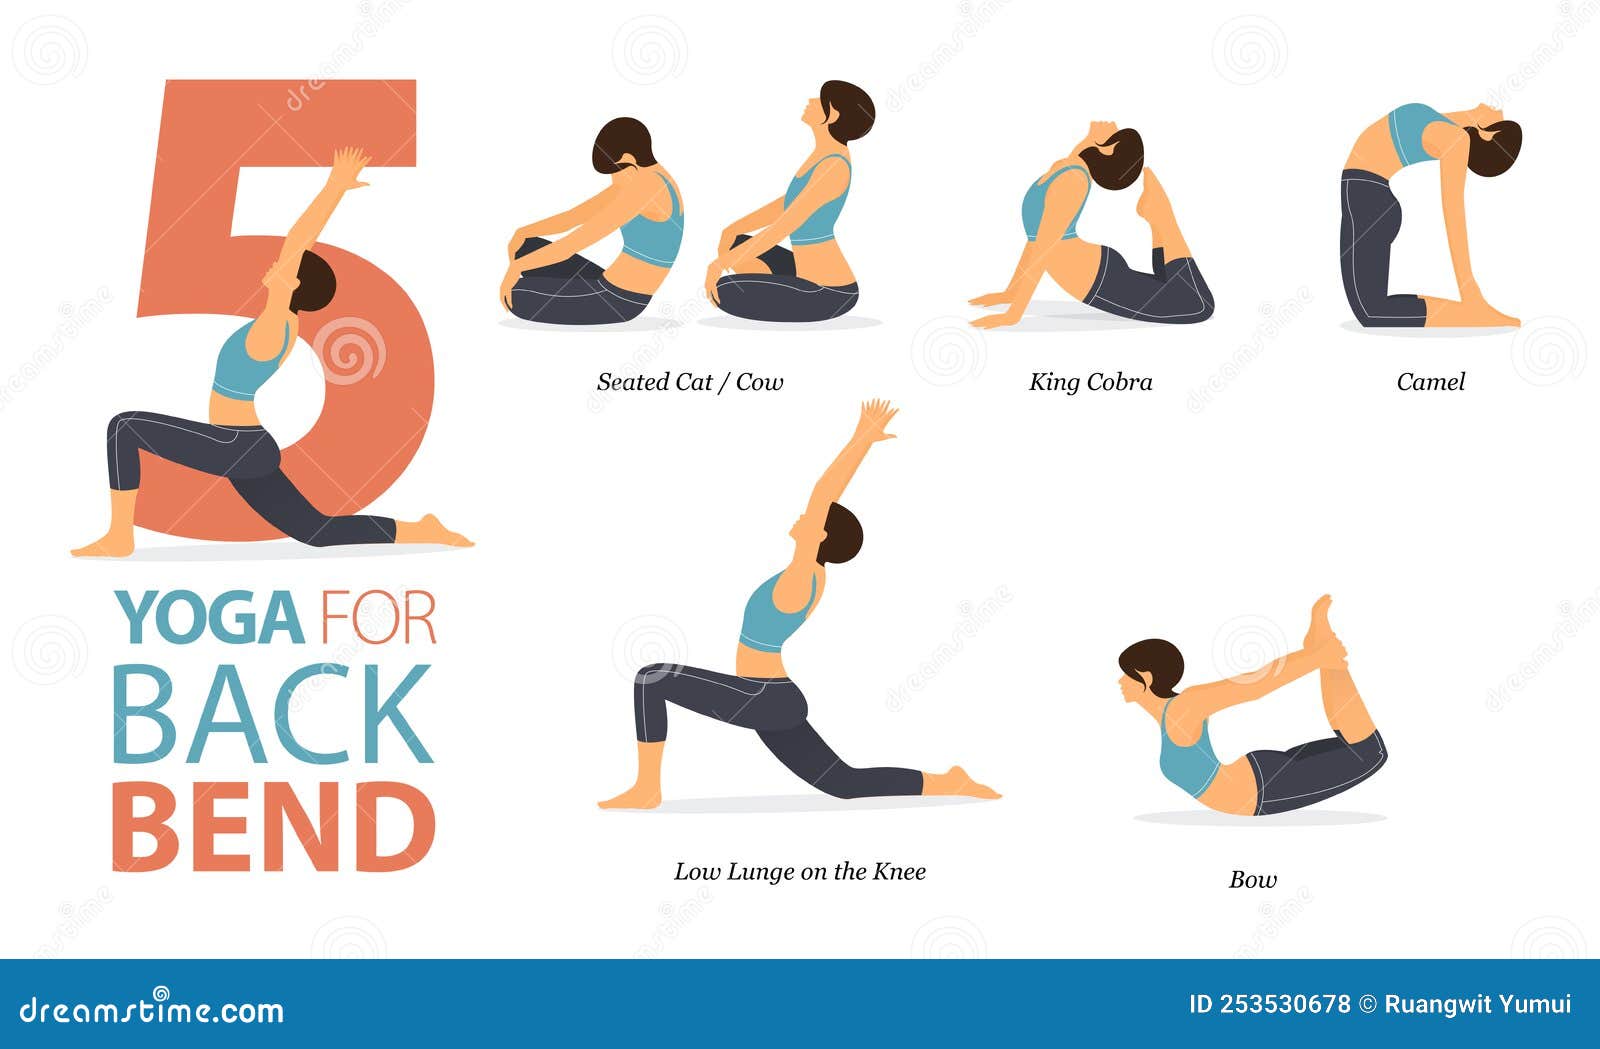 5 Yoga Poses or Asana Posture for Workout in Back Bend Concept. Women ...